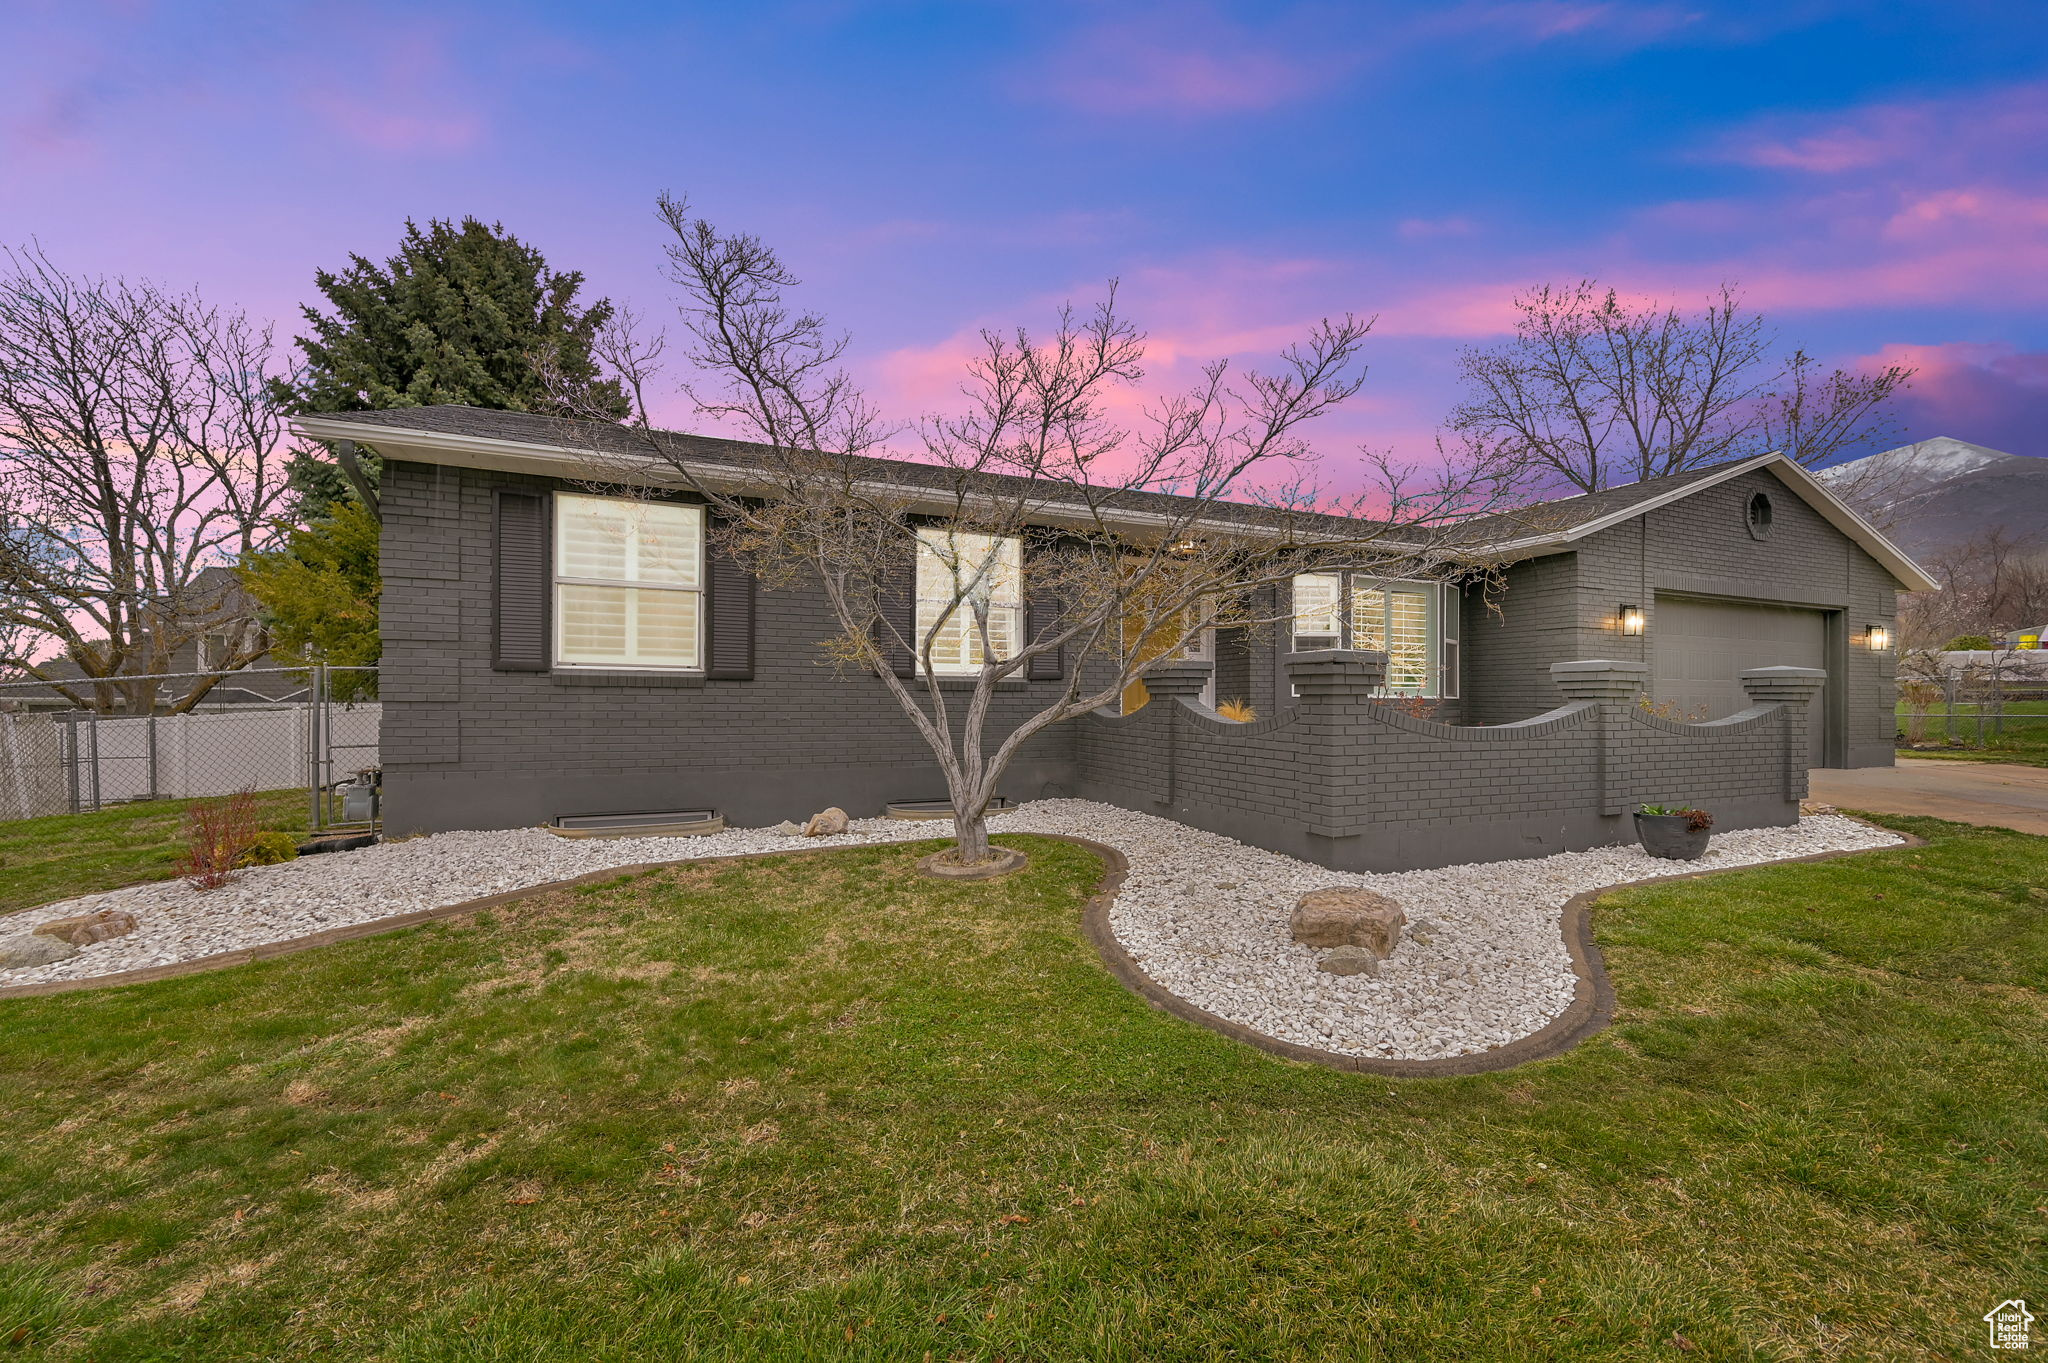 Ranch-style home with a secluded yard and located in a very family friendly neighborhood/circle